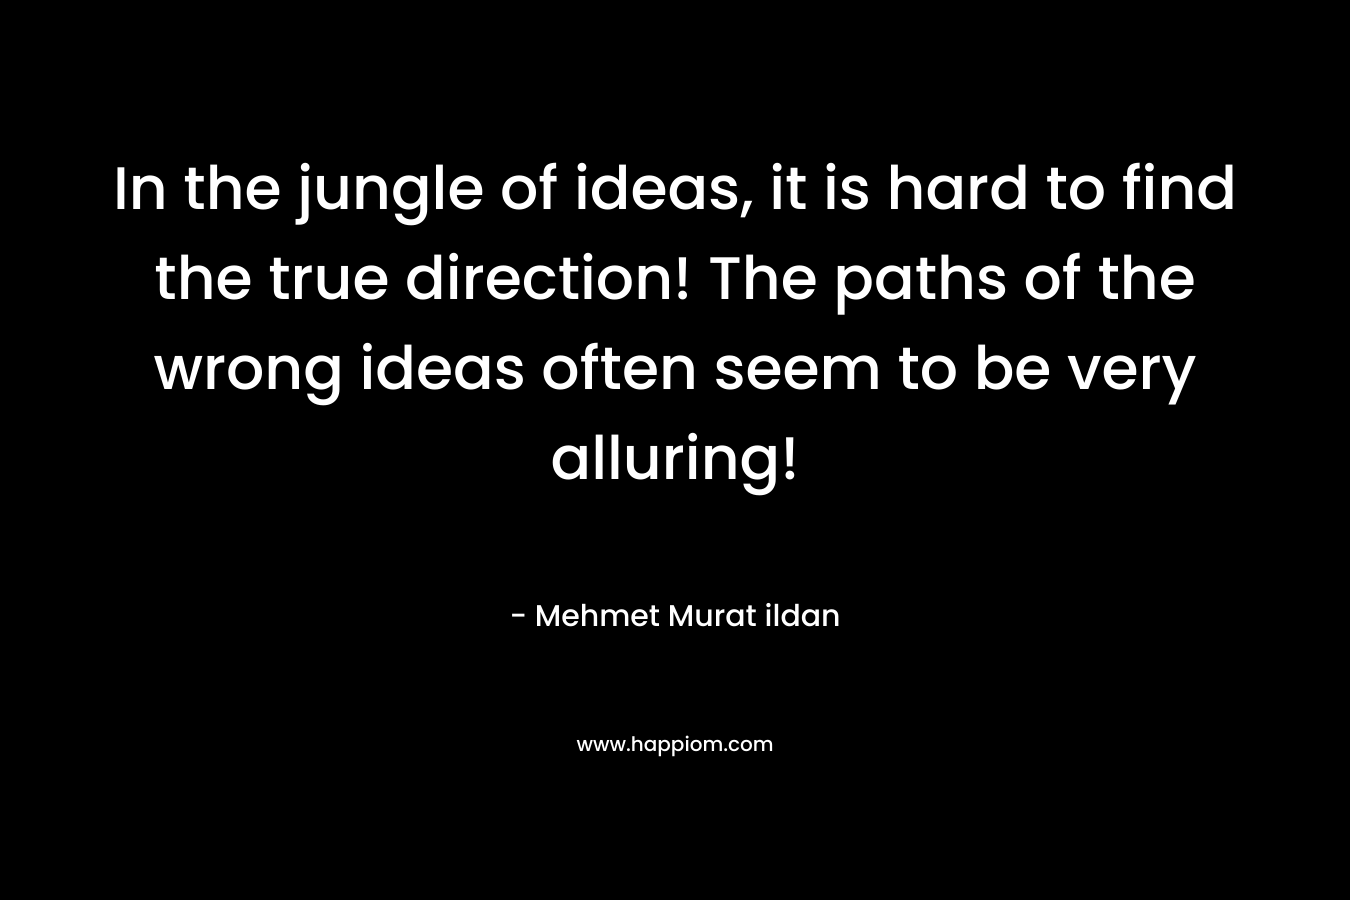 In the jungle of ideas, it is hard to find the true direction! The paths of the wrong ideas often seem to be very alluring! – Mehmet Murat ildan